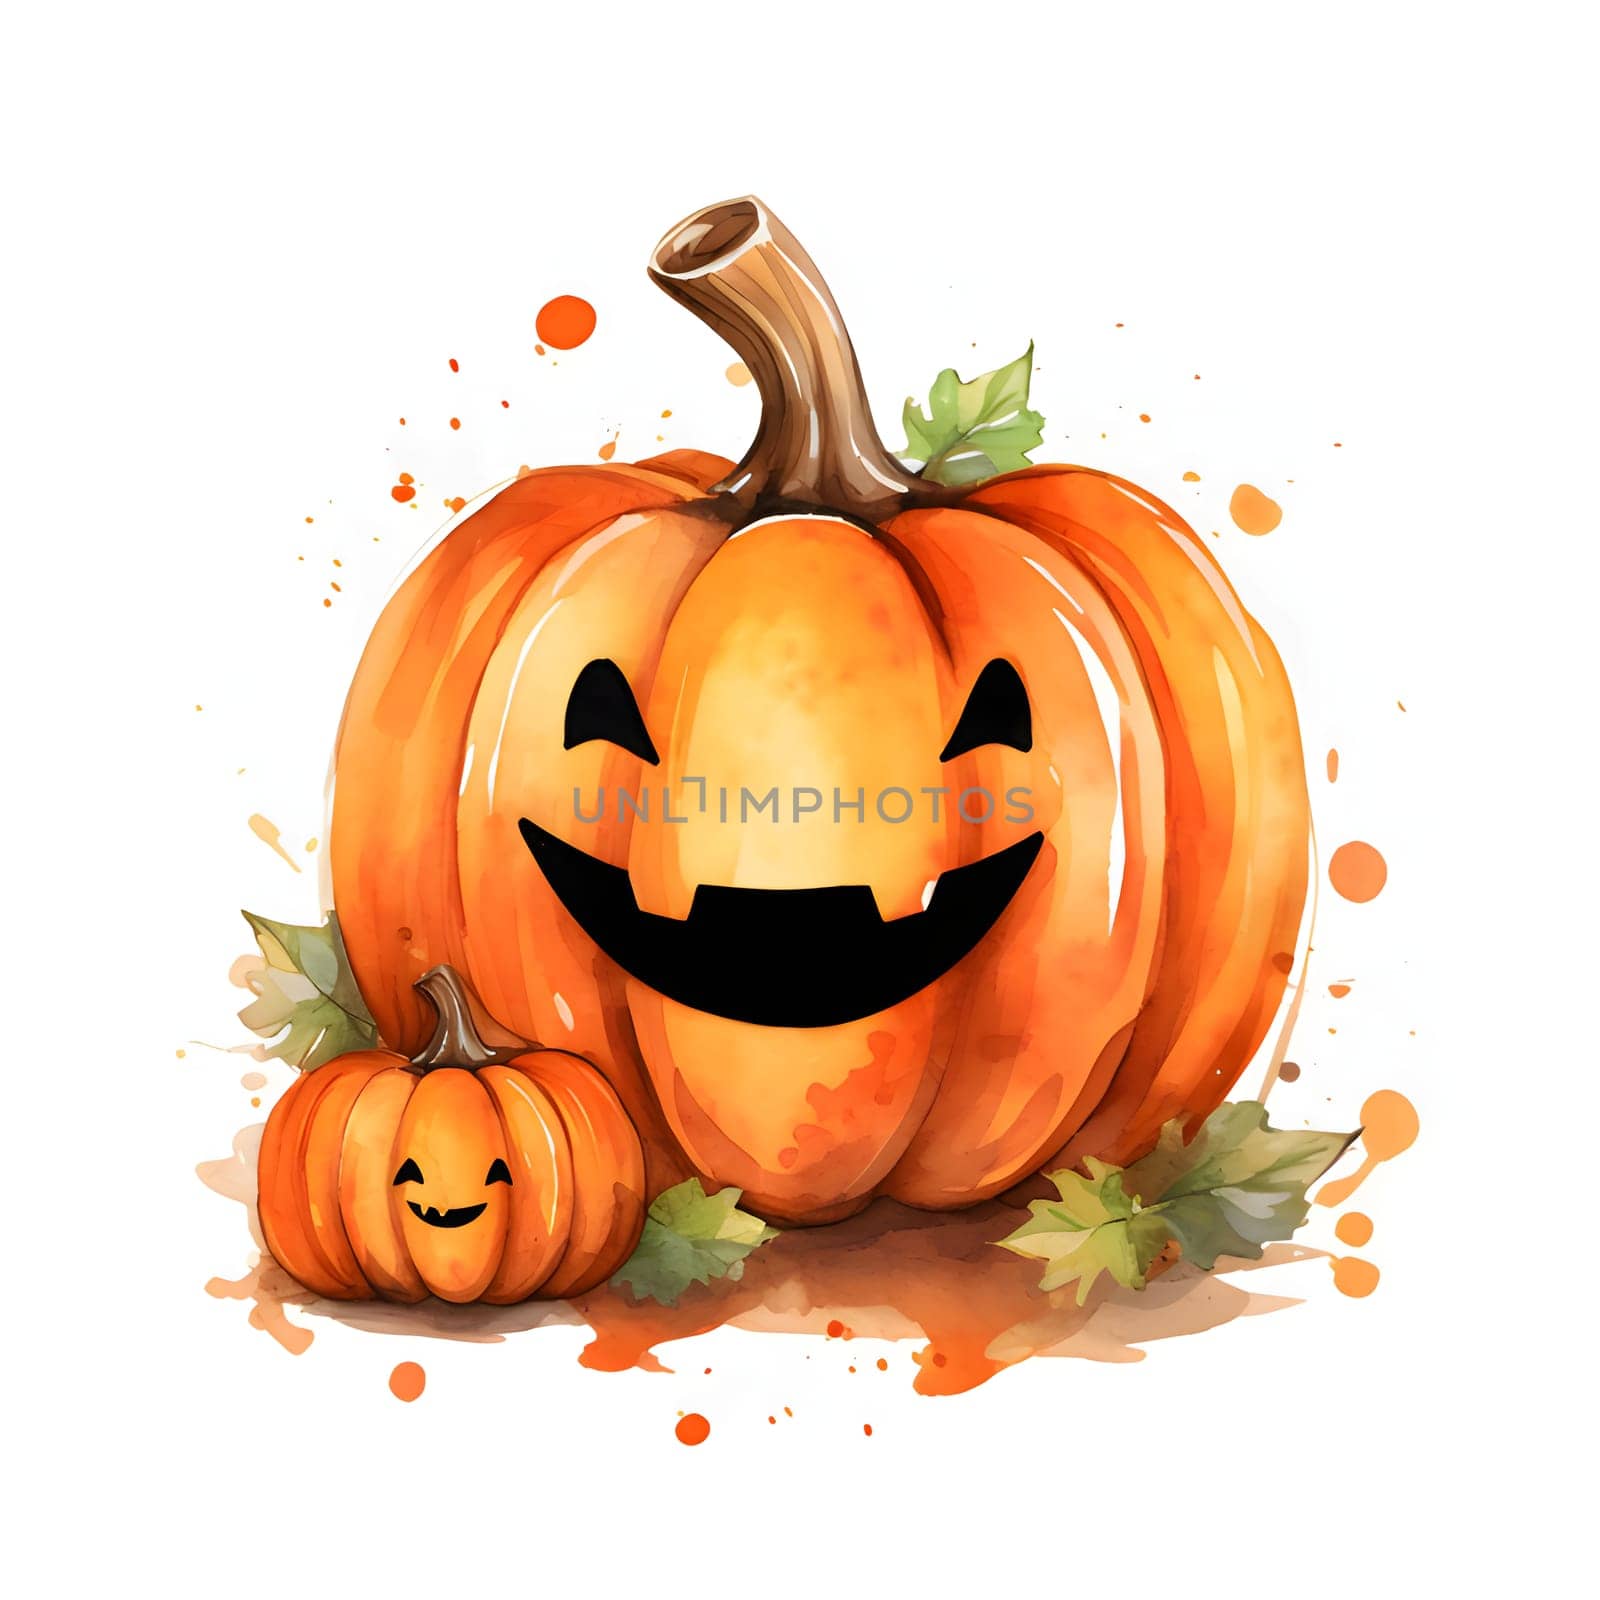 Happy painted with paints, watercolor jack-o-lantern pumpkins, Halloween image on a white isolated background. by ThemesS